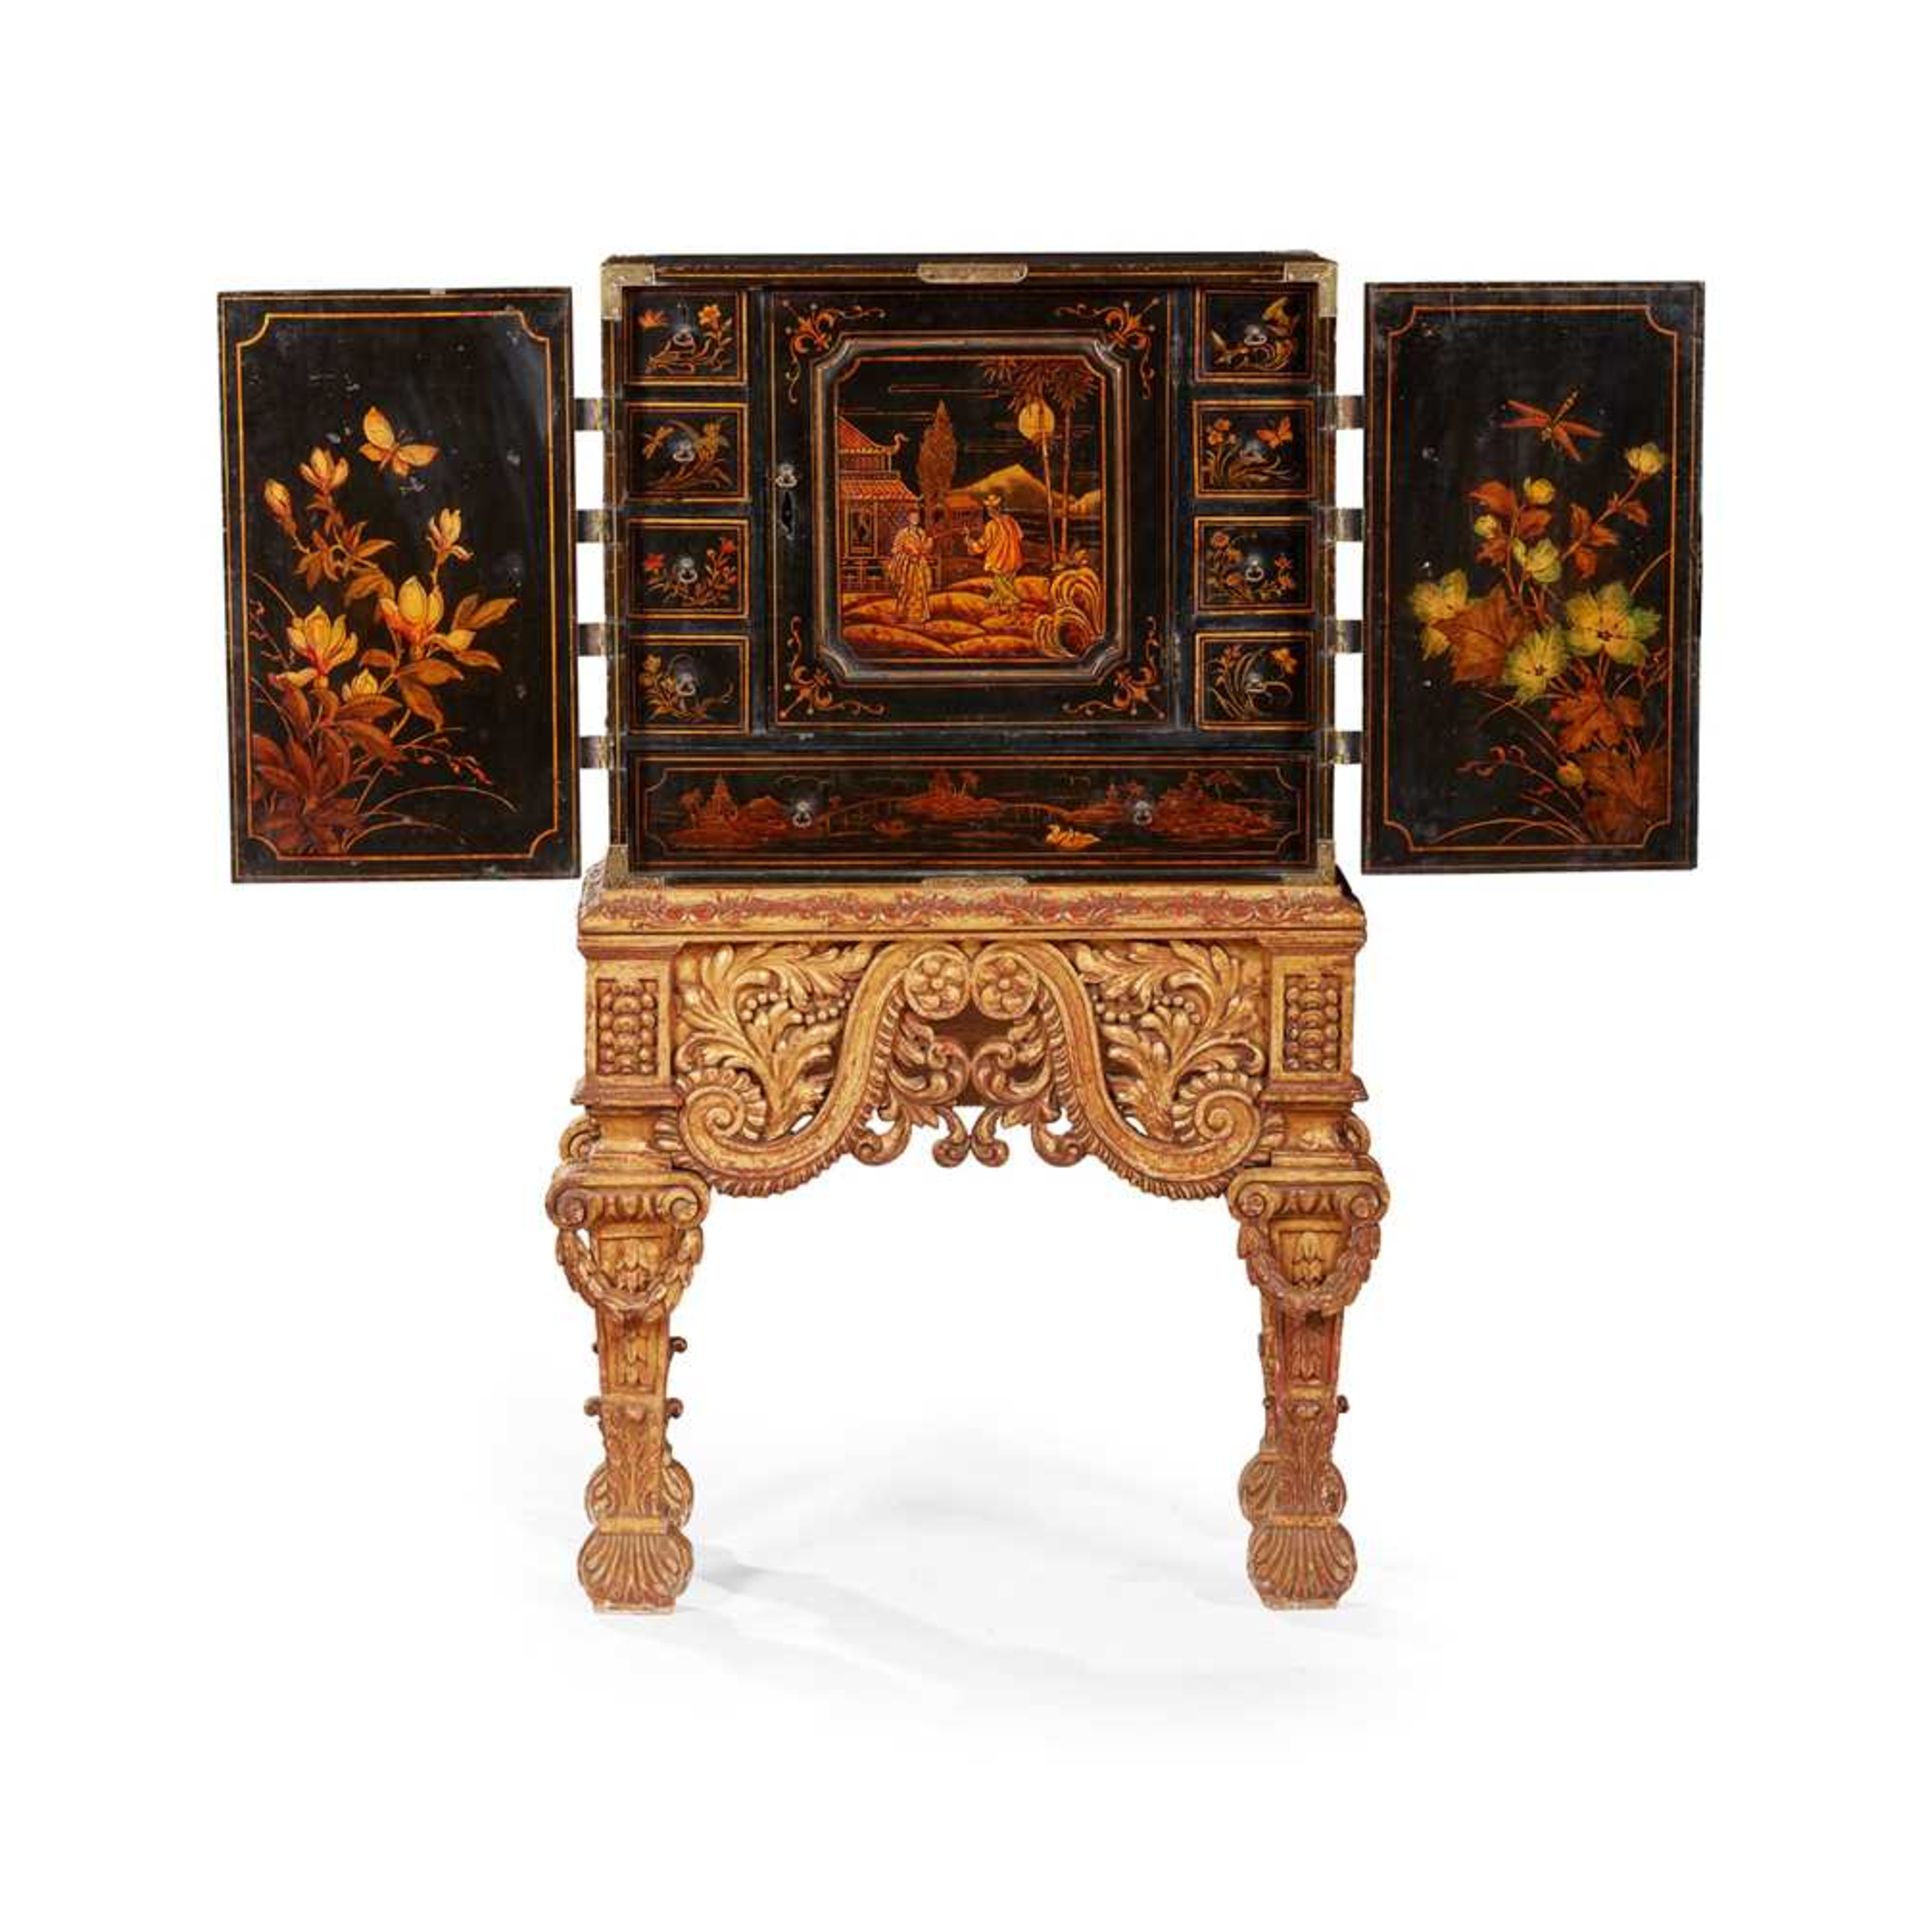 BLACK JAPANNED CHINOISERIE SMALL CABINET-ON-STAND LATE 18TH CENTURY; THE STAND 19TH CENTURY - Image 2 of 3